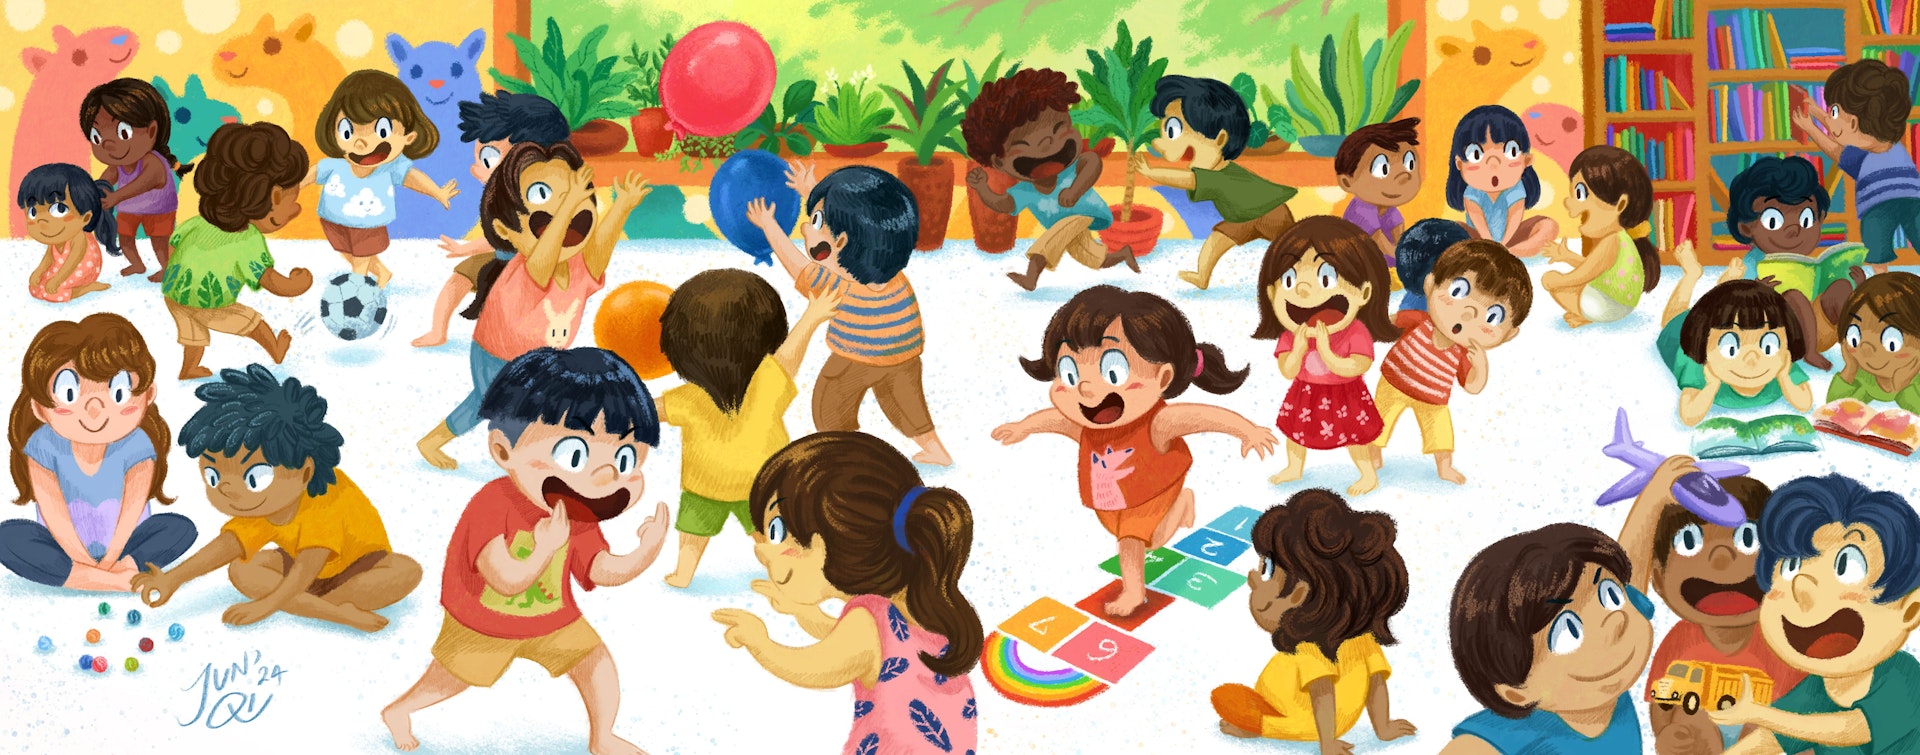 Illustration of children playing during recess in a colorful classroom.